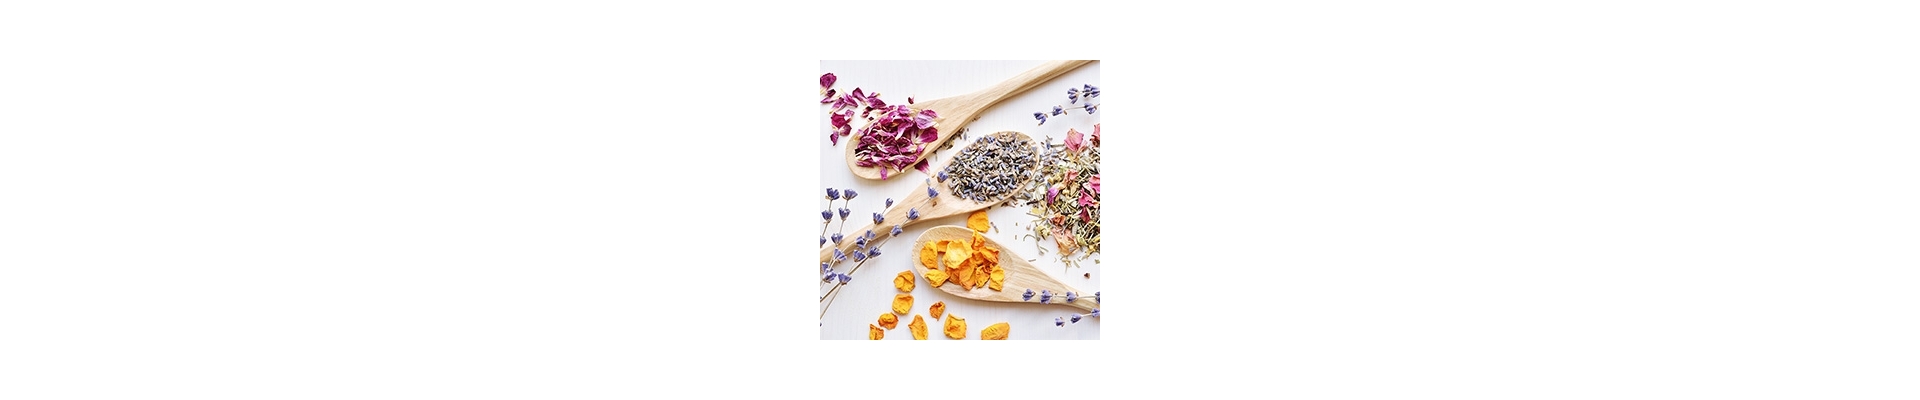 Botanicals for Cosmetics & Toiletries | The Soap Kitchen™